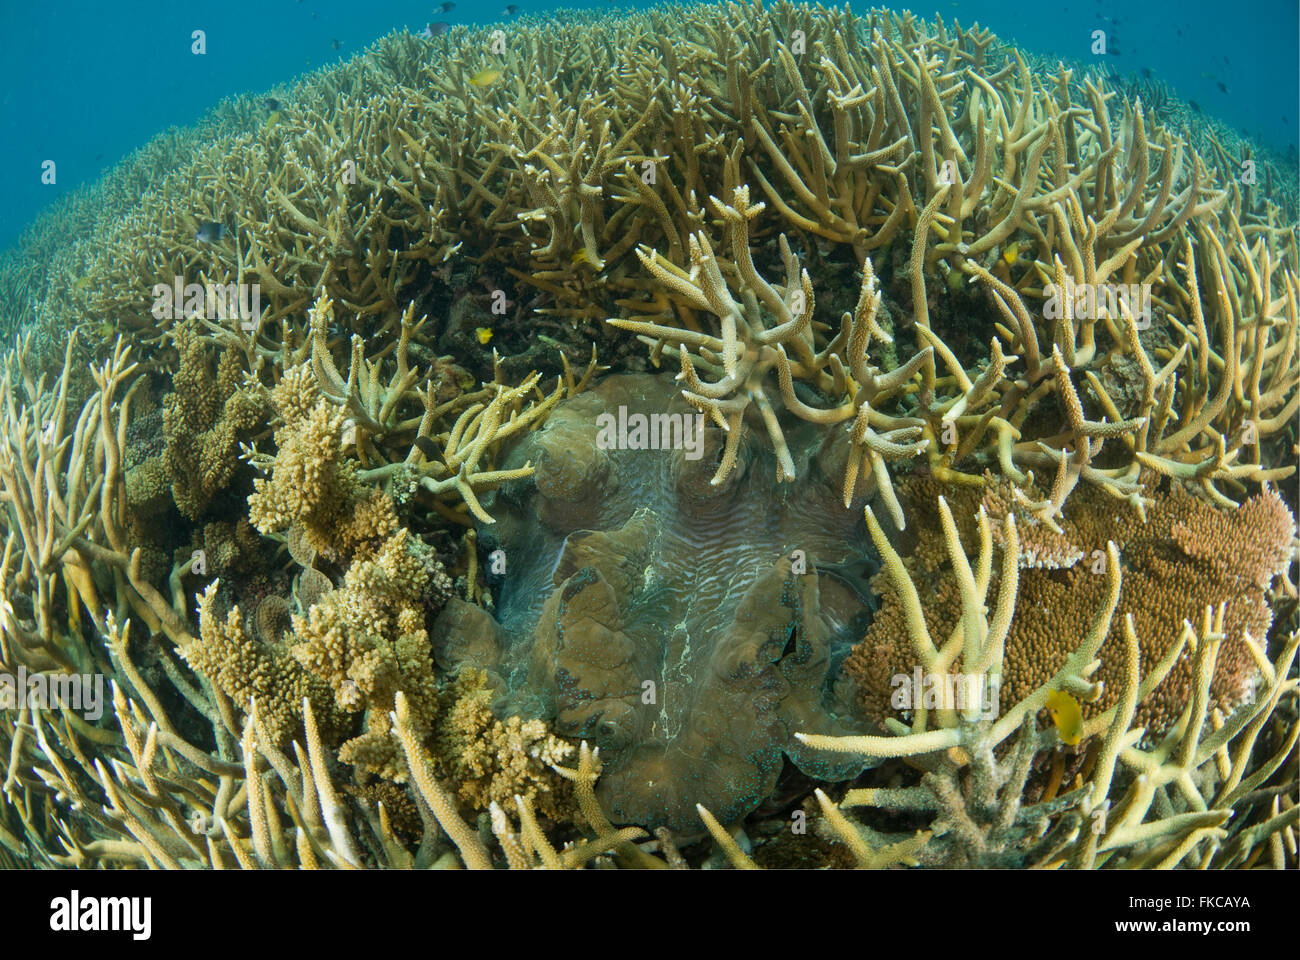 Giant clam, (Tridacna gigas) trapped in staghorn coral reef Stock Photo